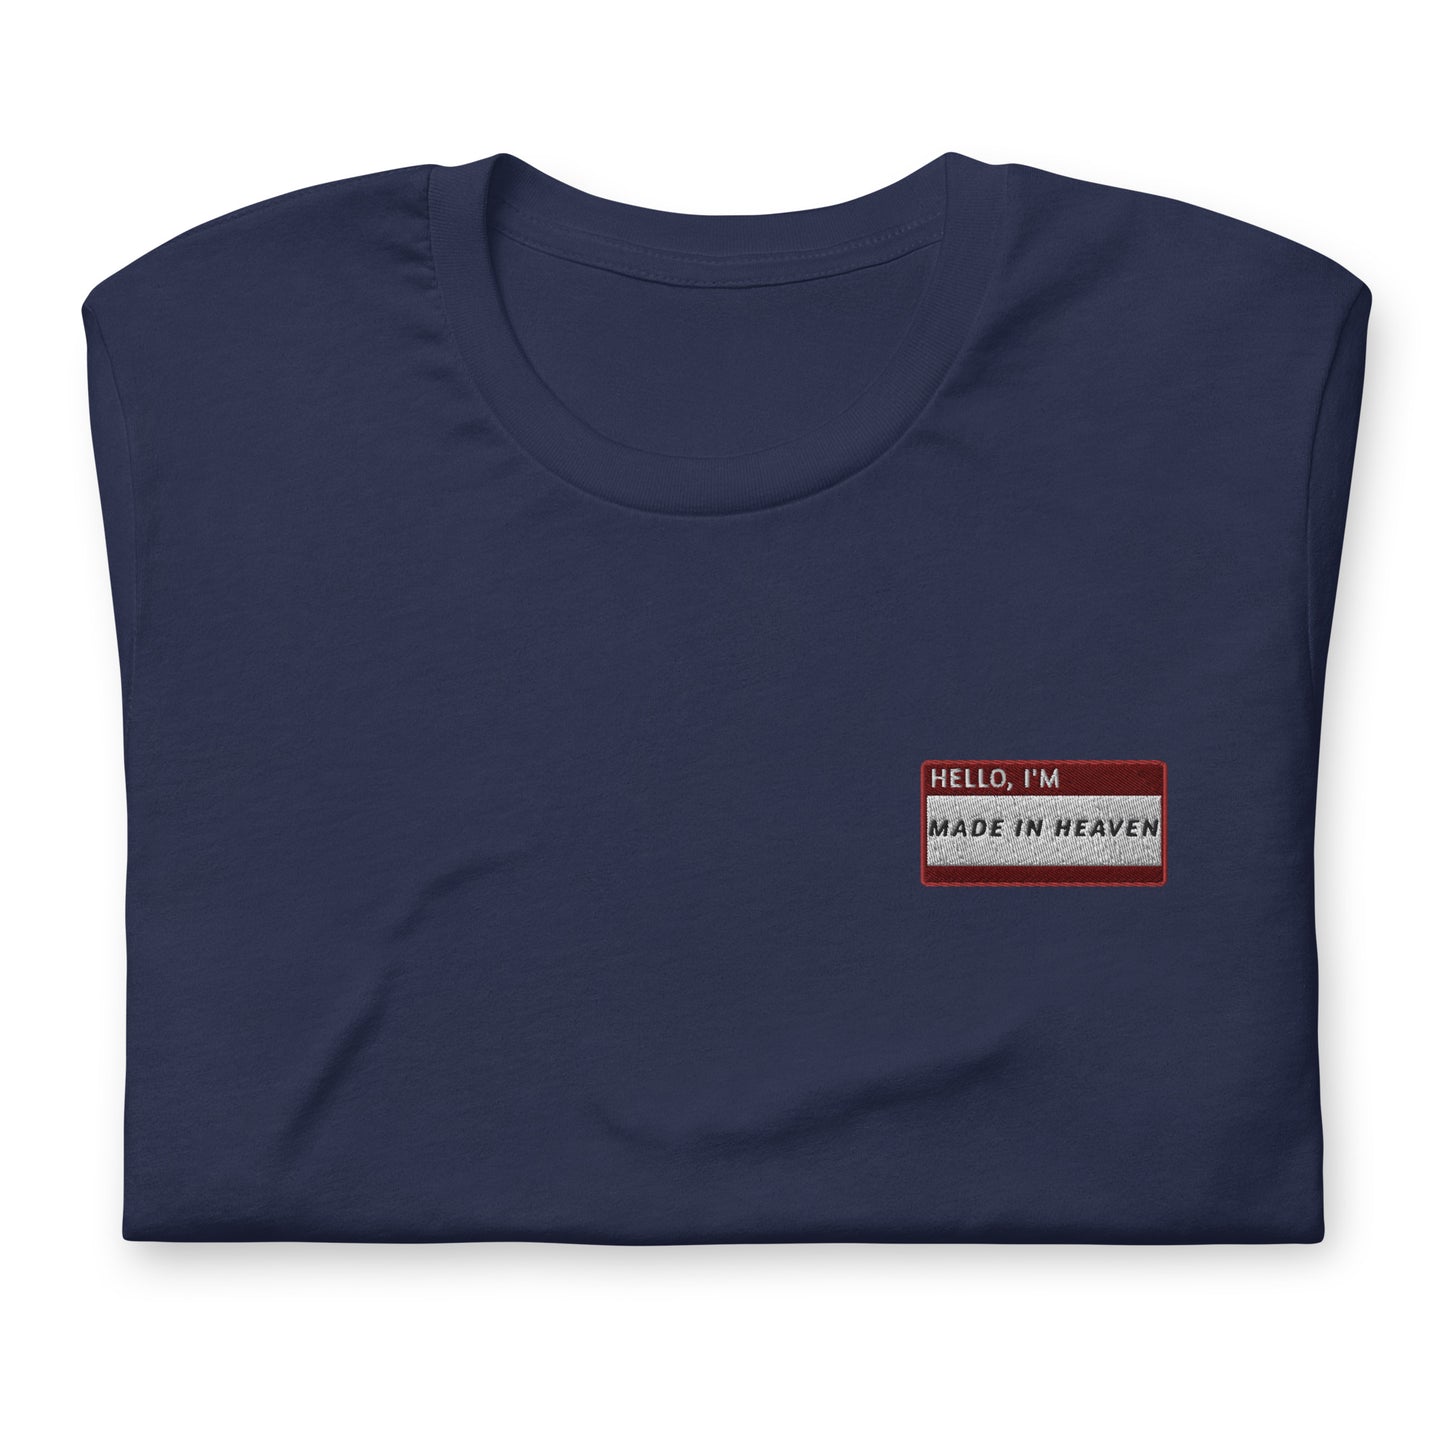 HELLO I'M MADE IN HEAVEN - Name Tag T-Shirt